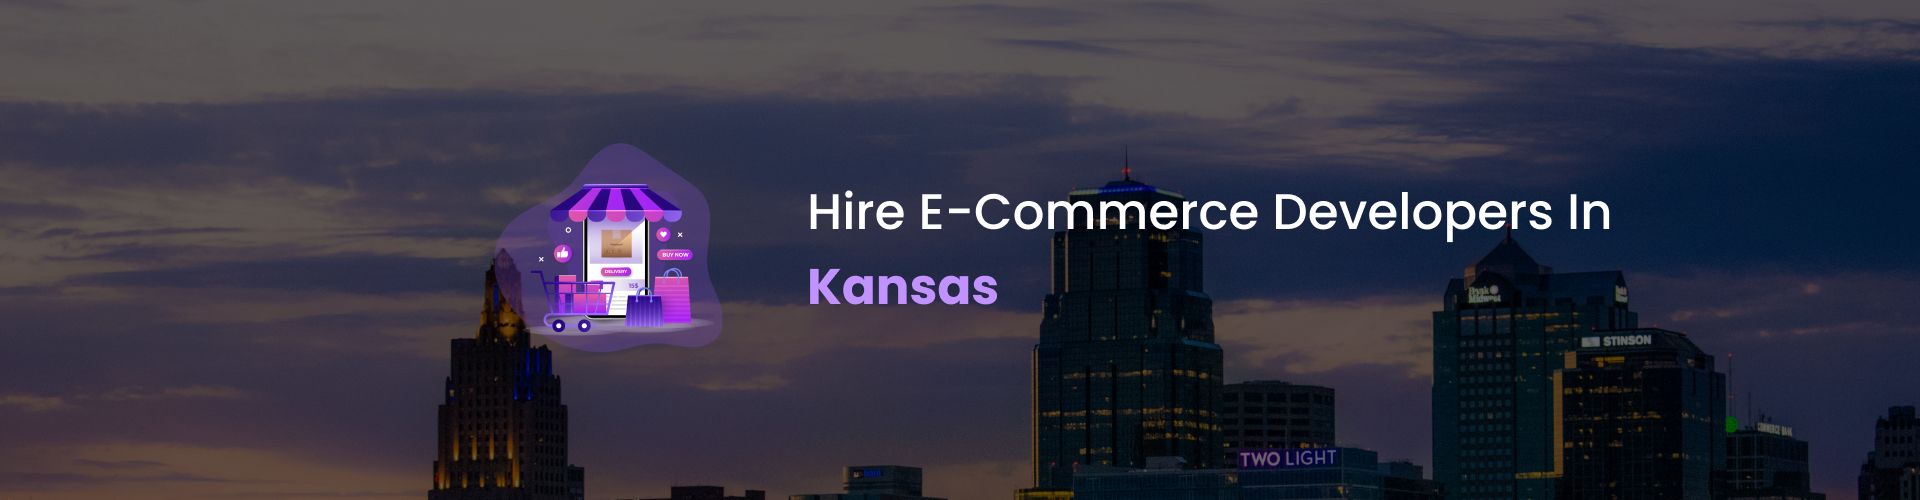 hire ecommerce developers in kansas